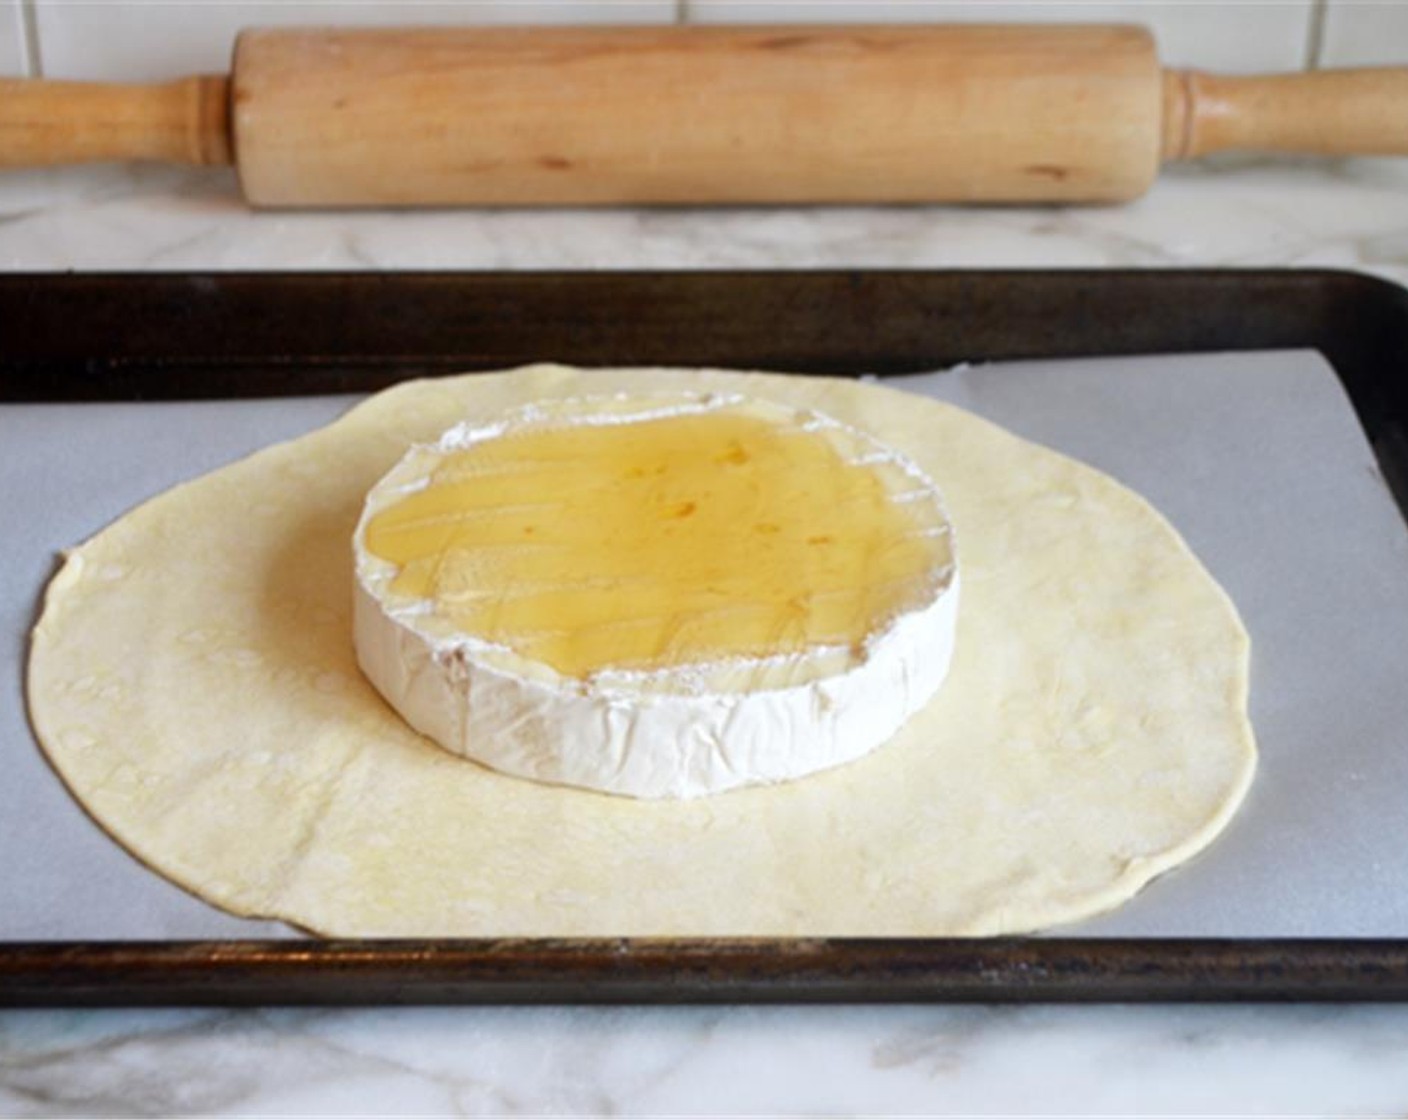 step 3 Place one of the pastry circles on a parchment-lined baking sheet. Cut off the top rind of the Brie Cheese Round (1) and place on top of the pastry. Then drizzle with Honey (2 Tbsp).